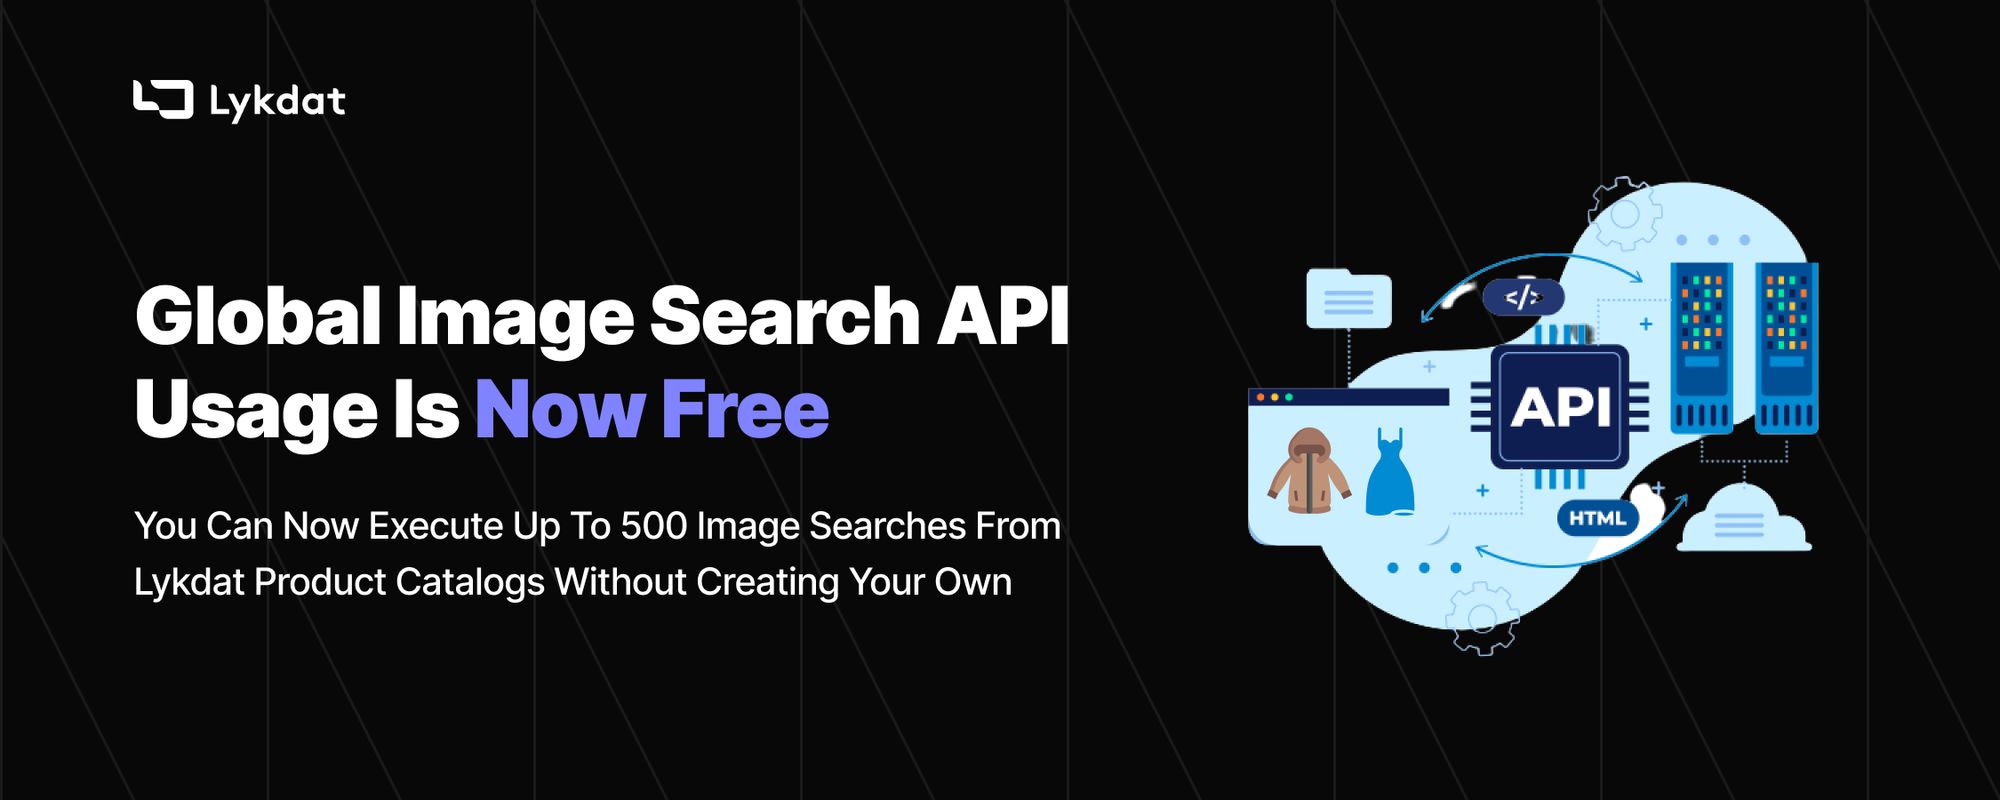 Our Global Image Search API is Now Free